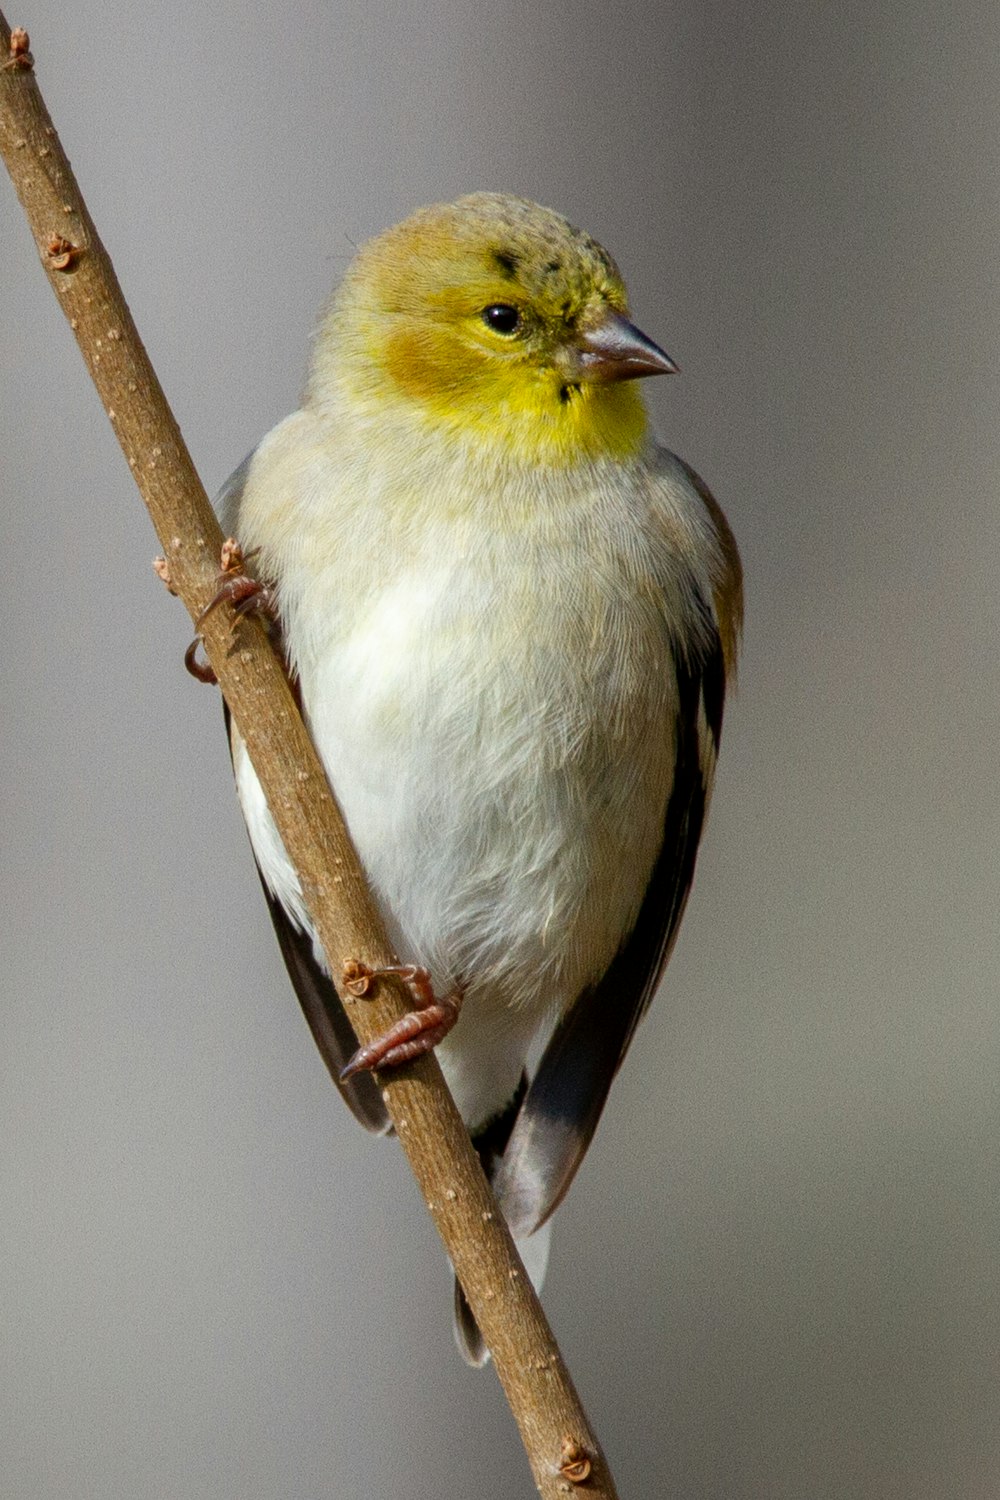 a small yellow and white bird perched on a branch